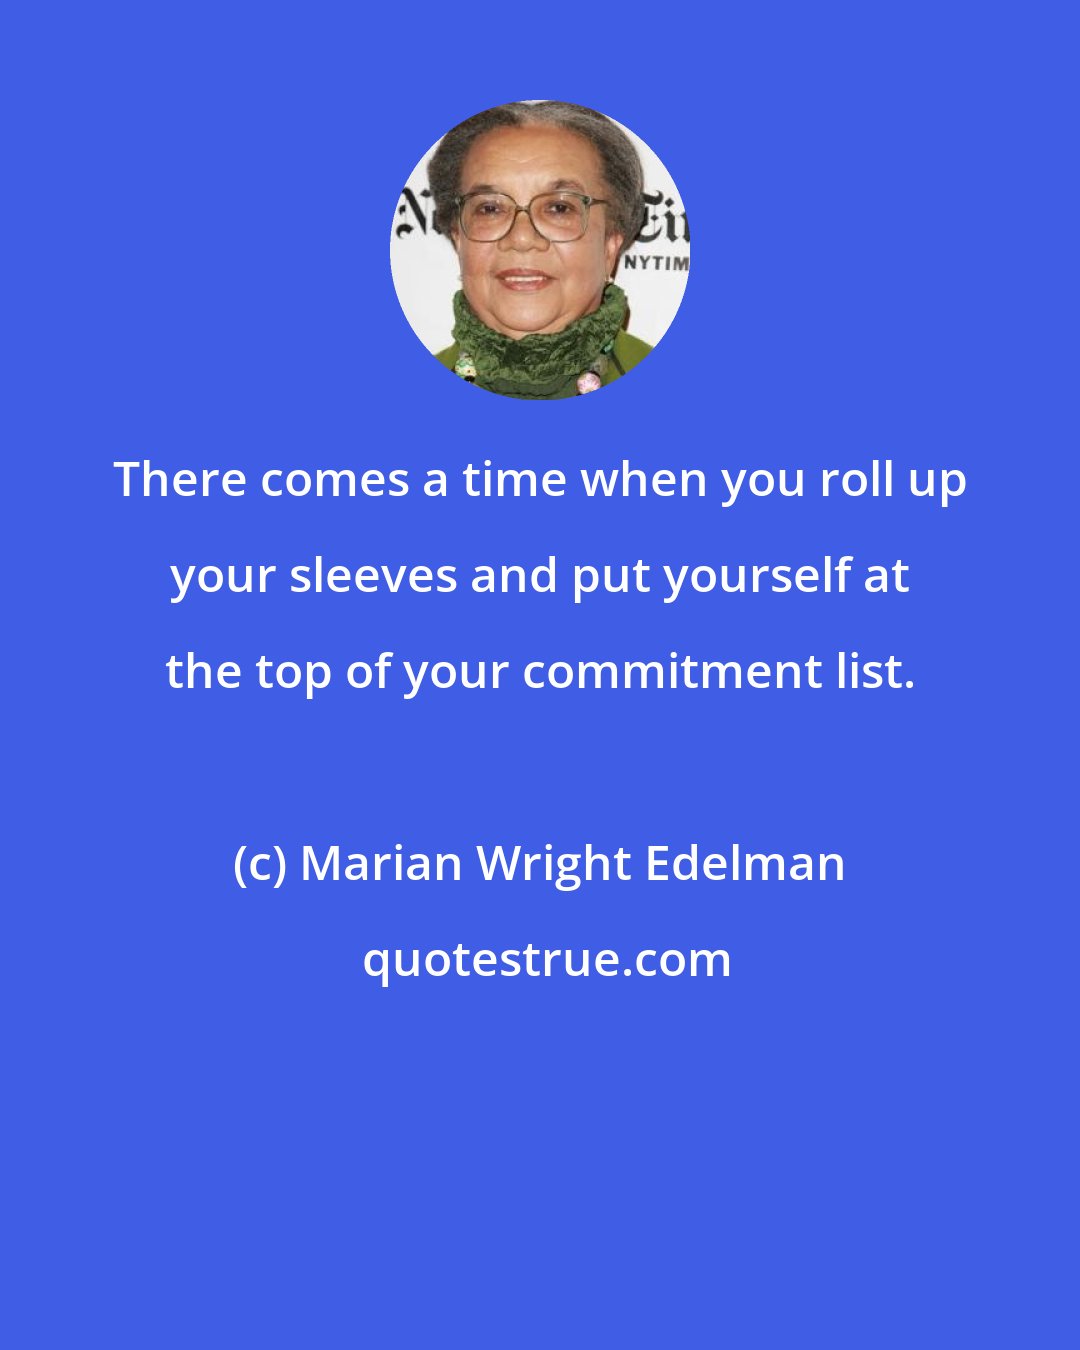 Marian Wright Edelman: There comes a time when you roll up your sleeves and put yourself at the top of your commitment list.